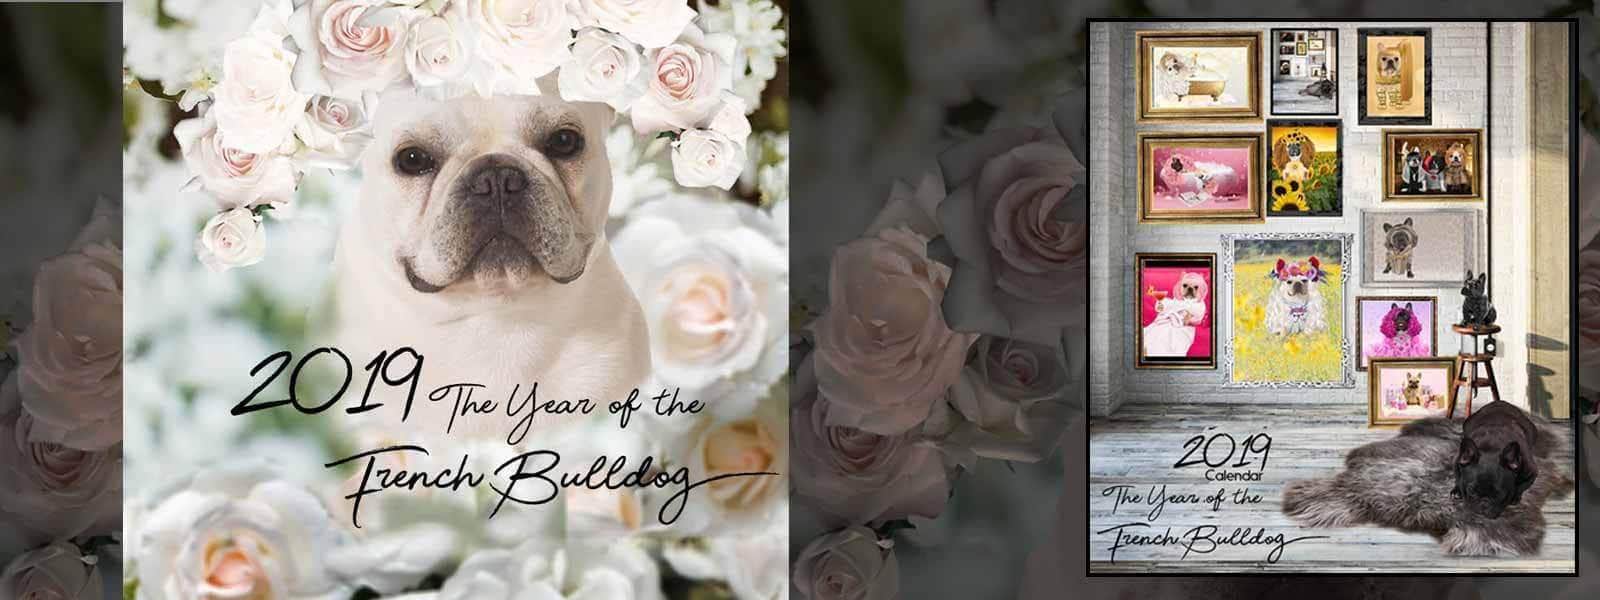 Year of the French Bulldog Calendar for 2019 Now Available